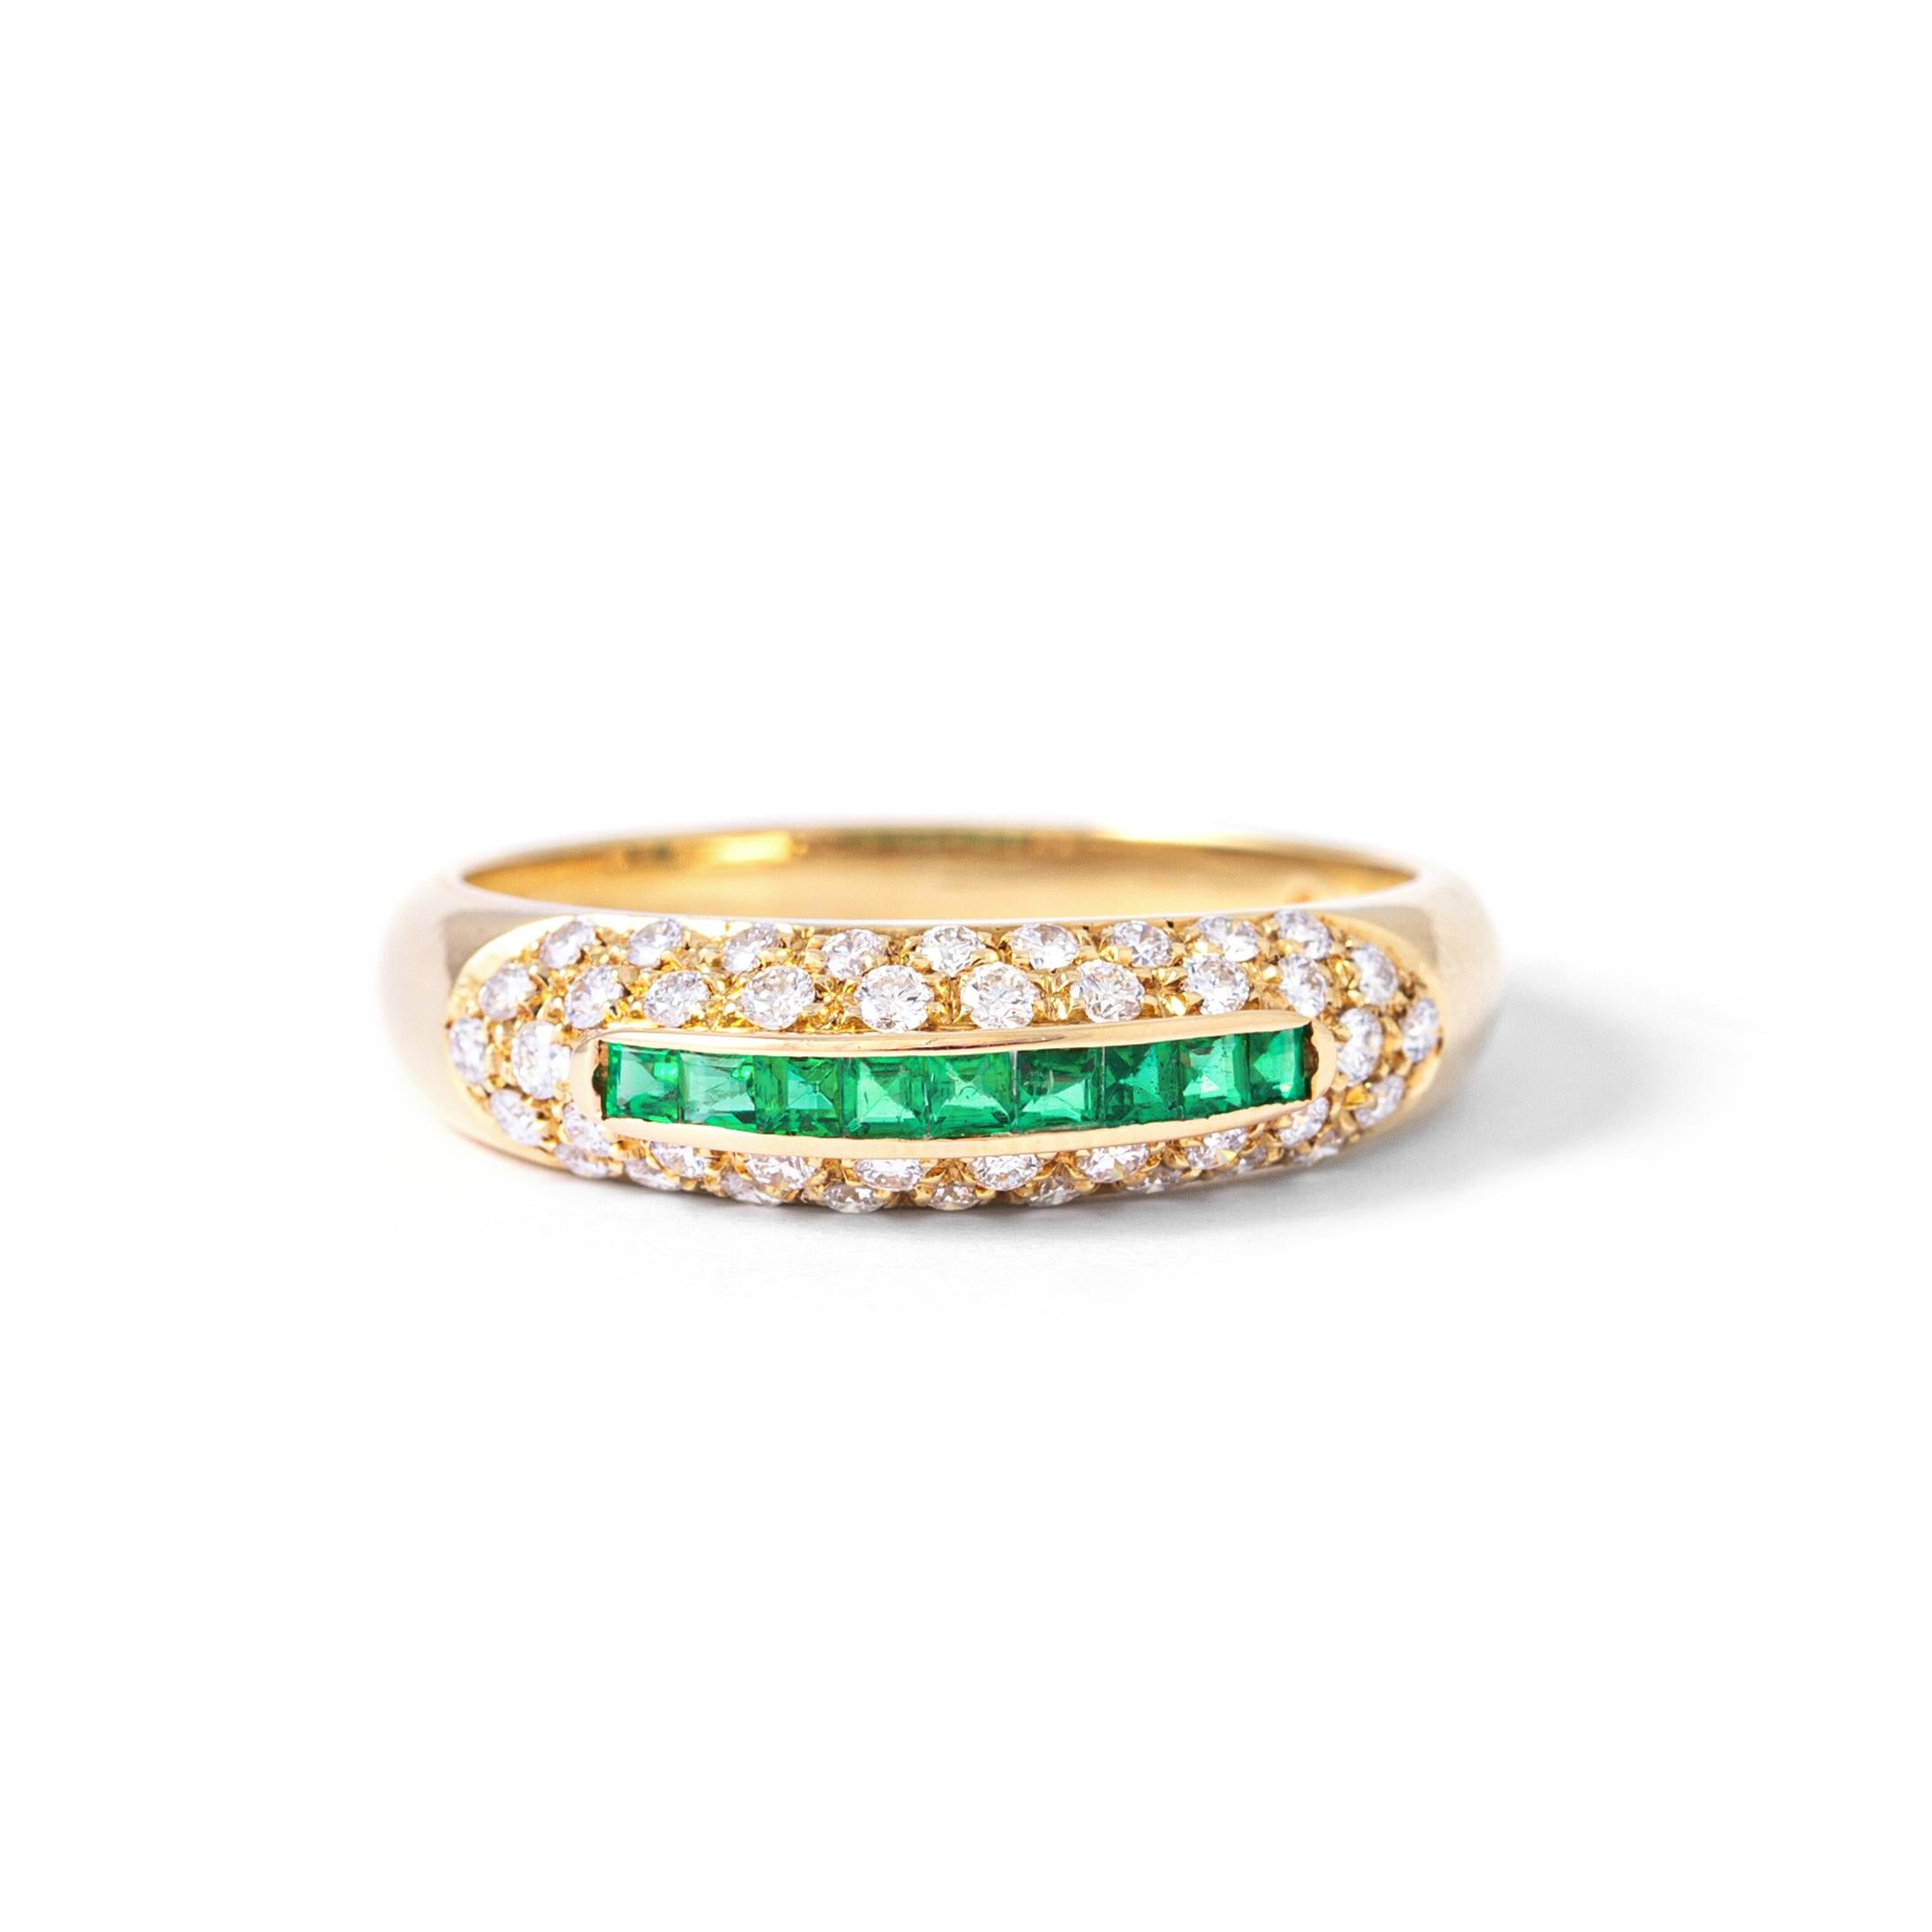 Ring in 18kt yellow gold set with 9 emeralds 0.24 cts and 42 diamonds 0.41 cts.
Size 57     